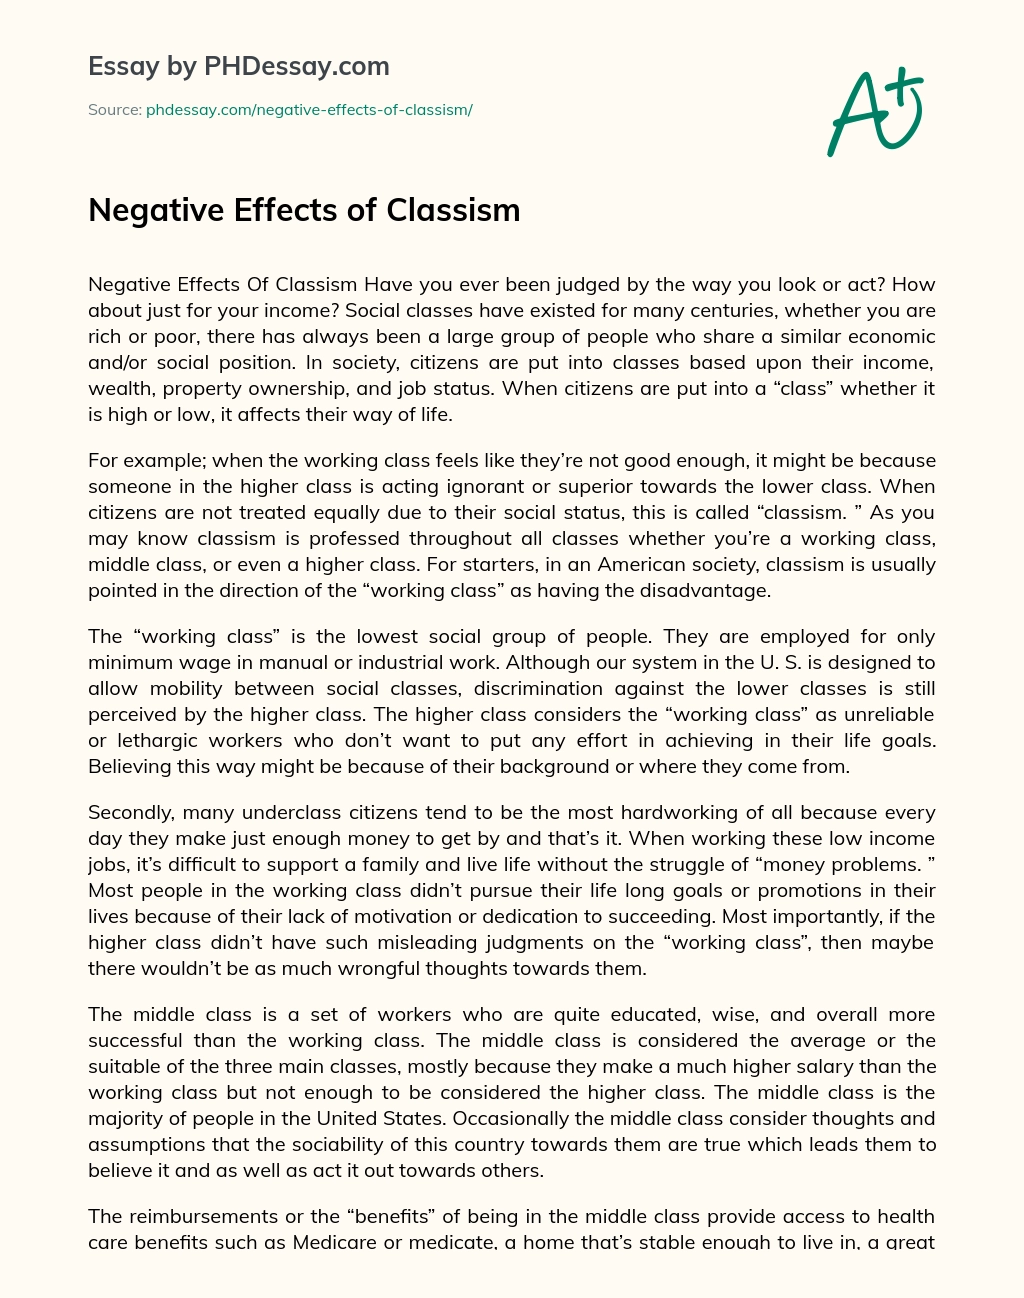 Negative Effects of Classism essay